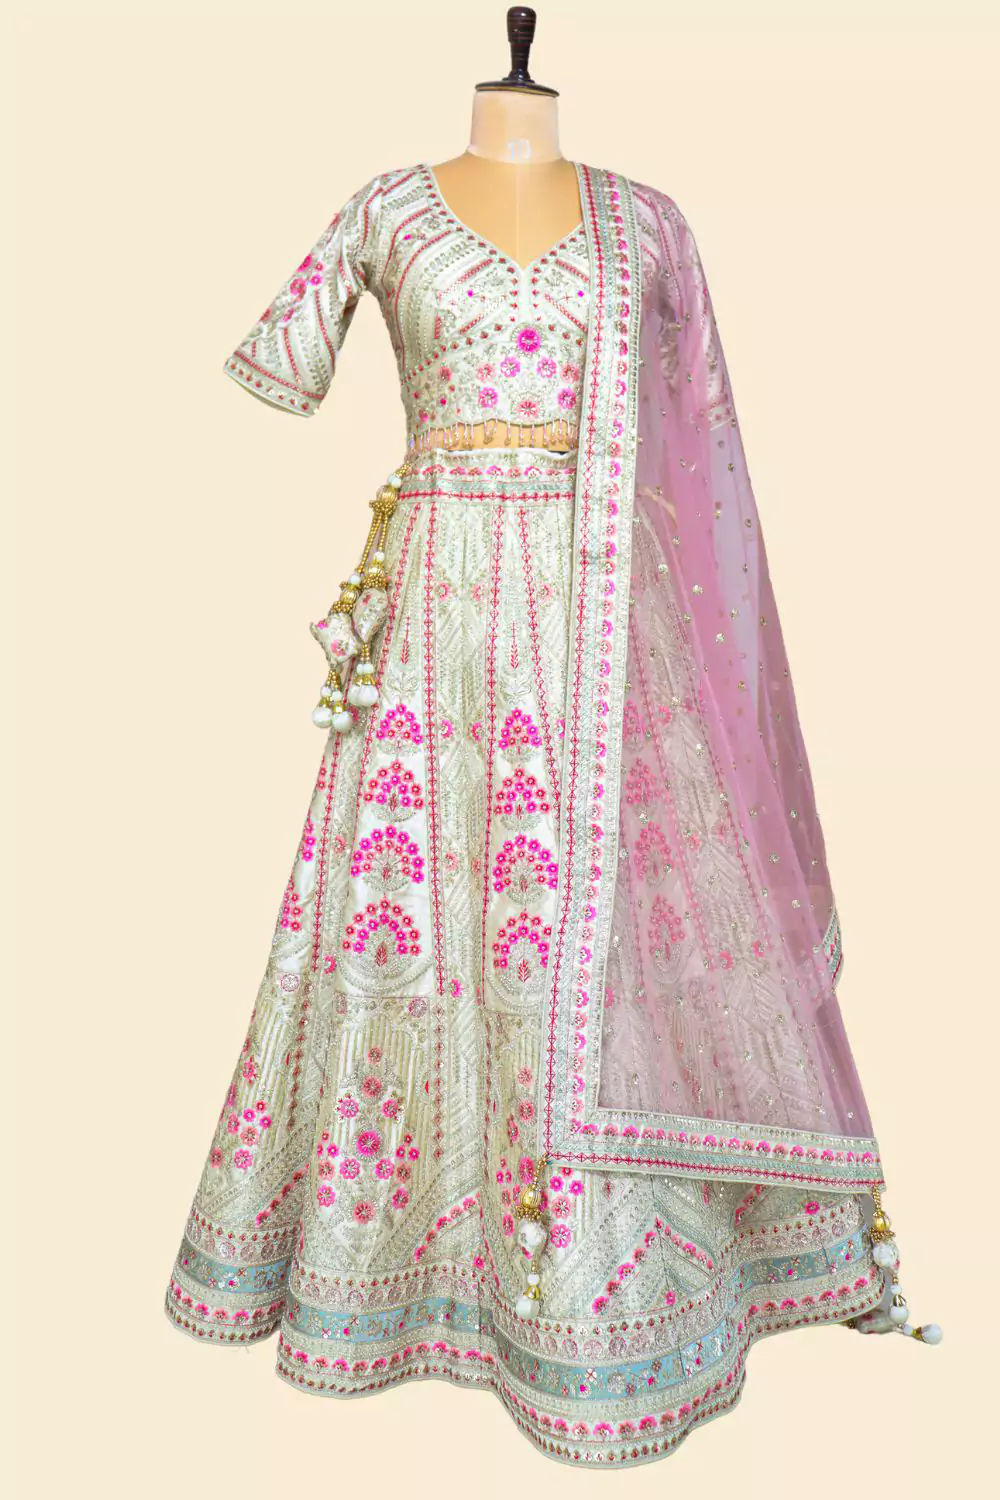 Off-White and Pink Embroidered Lehenga